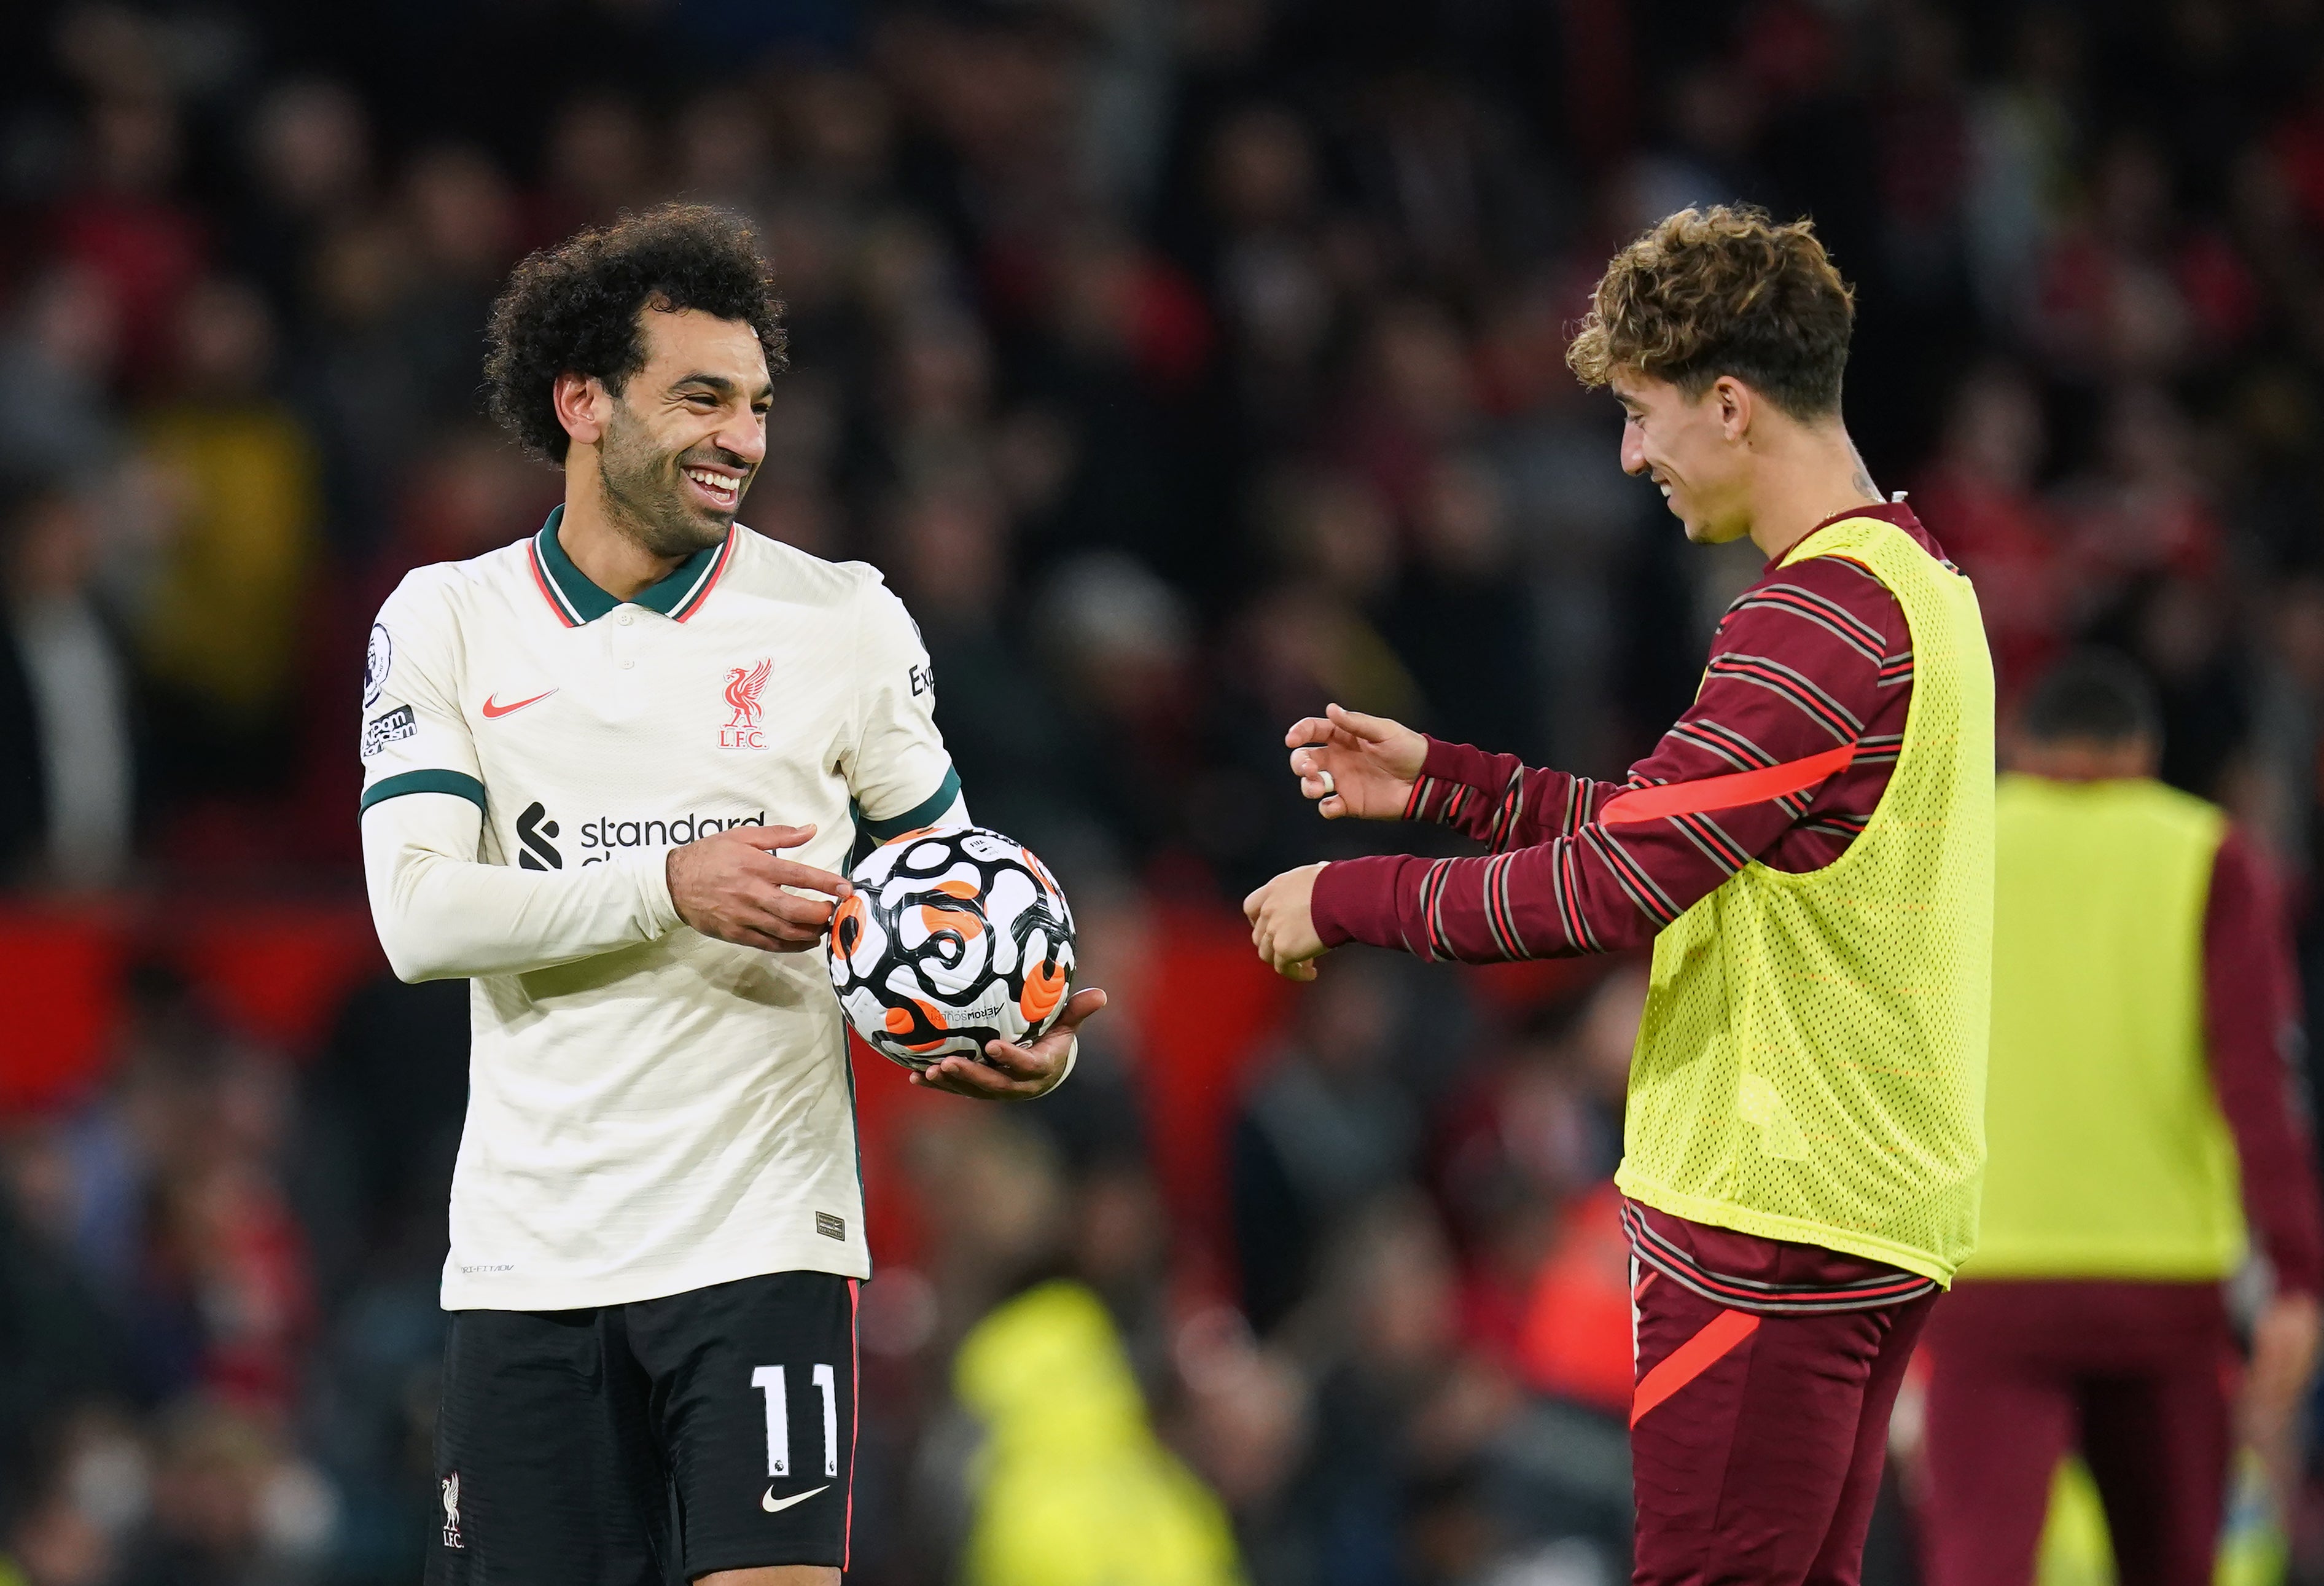 Mohamed Salah (left) scored a hat-trick in Liverpool’s 5-0 win at Manchester United (Martin Rickett/PA)